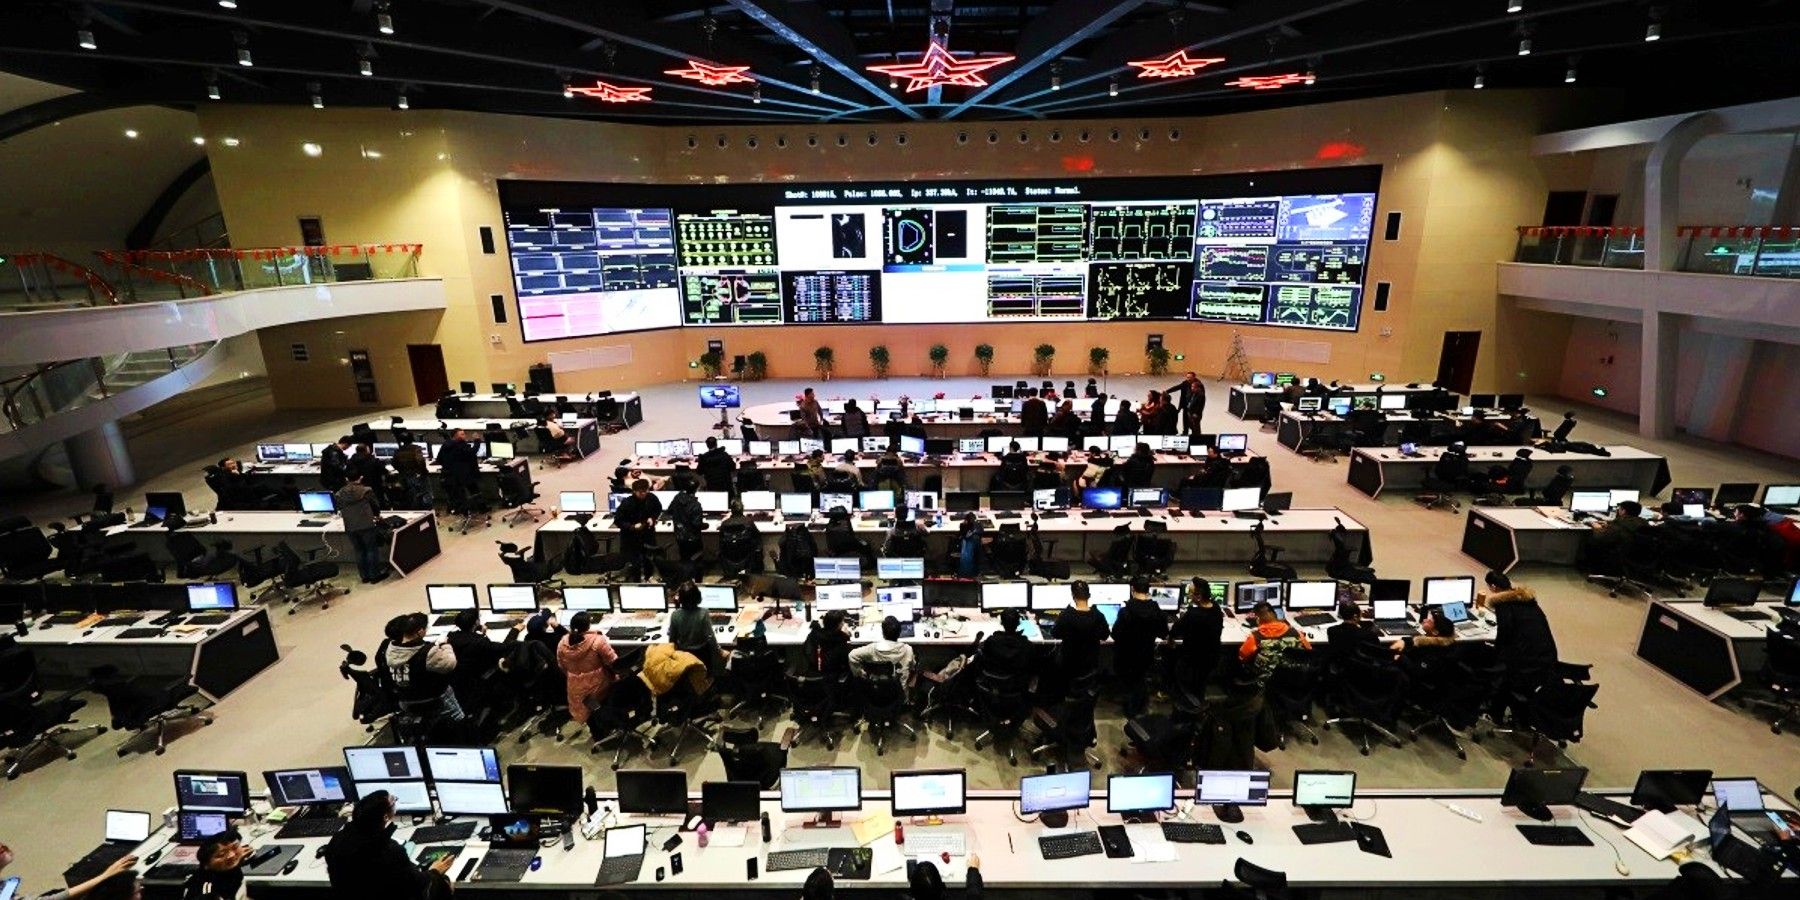 China EAST Artificial Sun Control Room. 